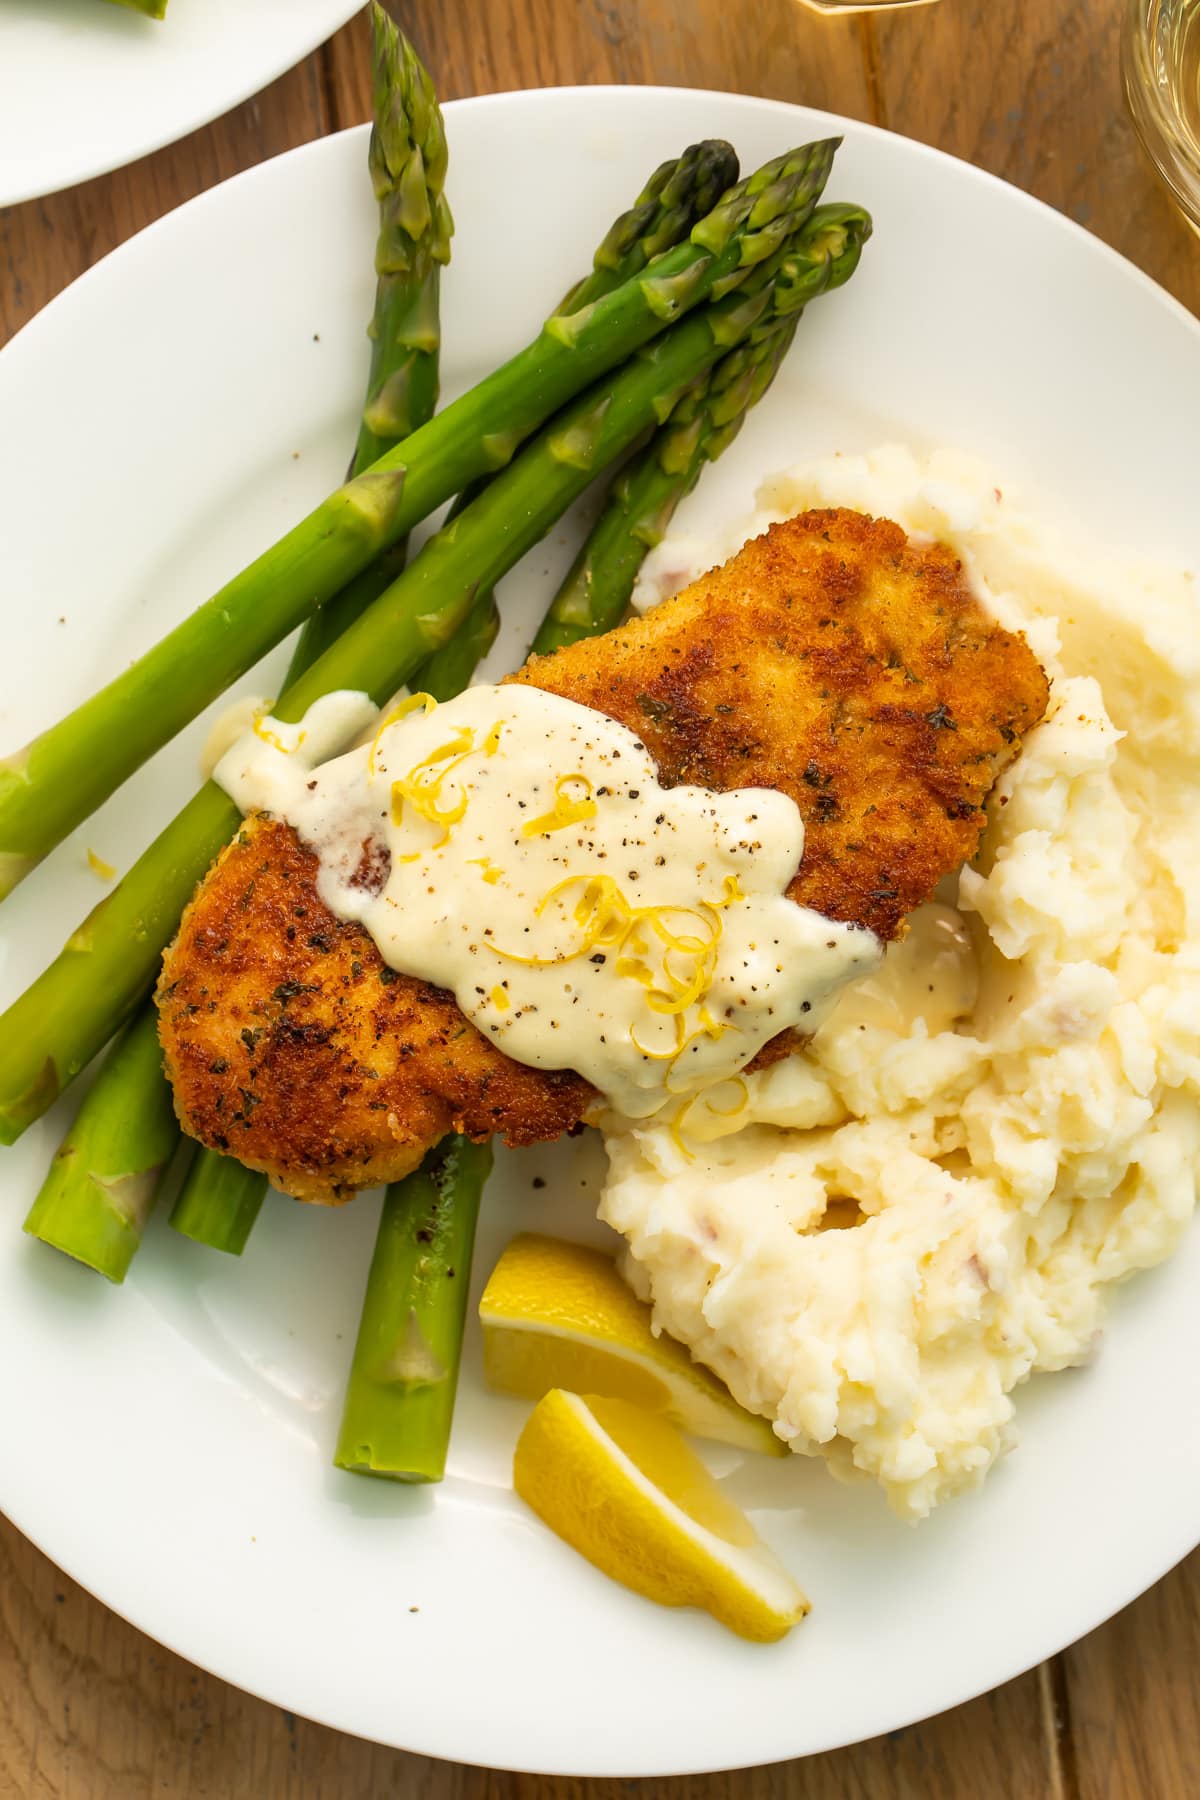 Breaded chicken costoletta topped with a cream sauce on a white plate with bright green asparagus.